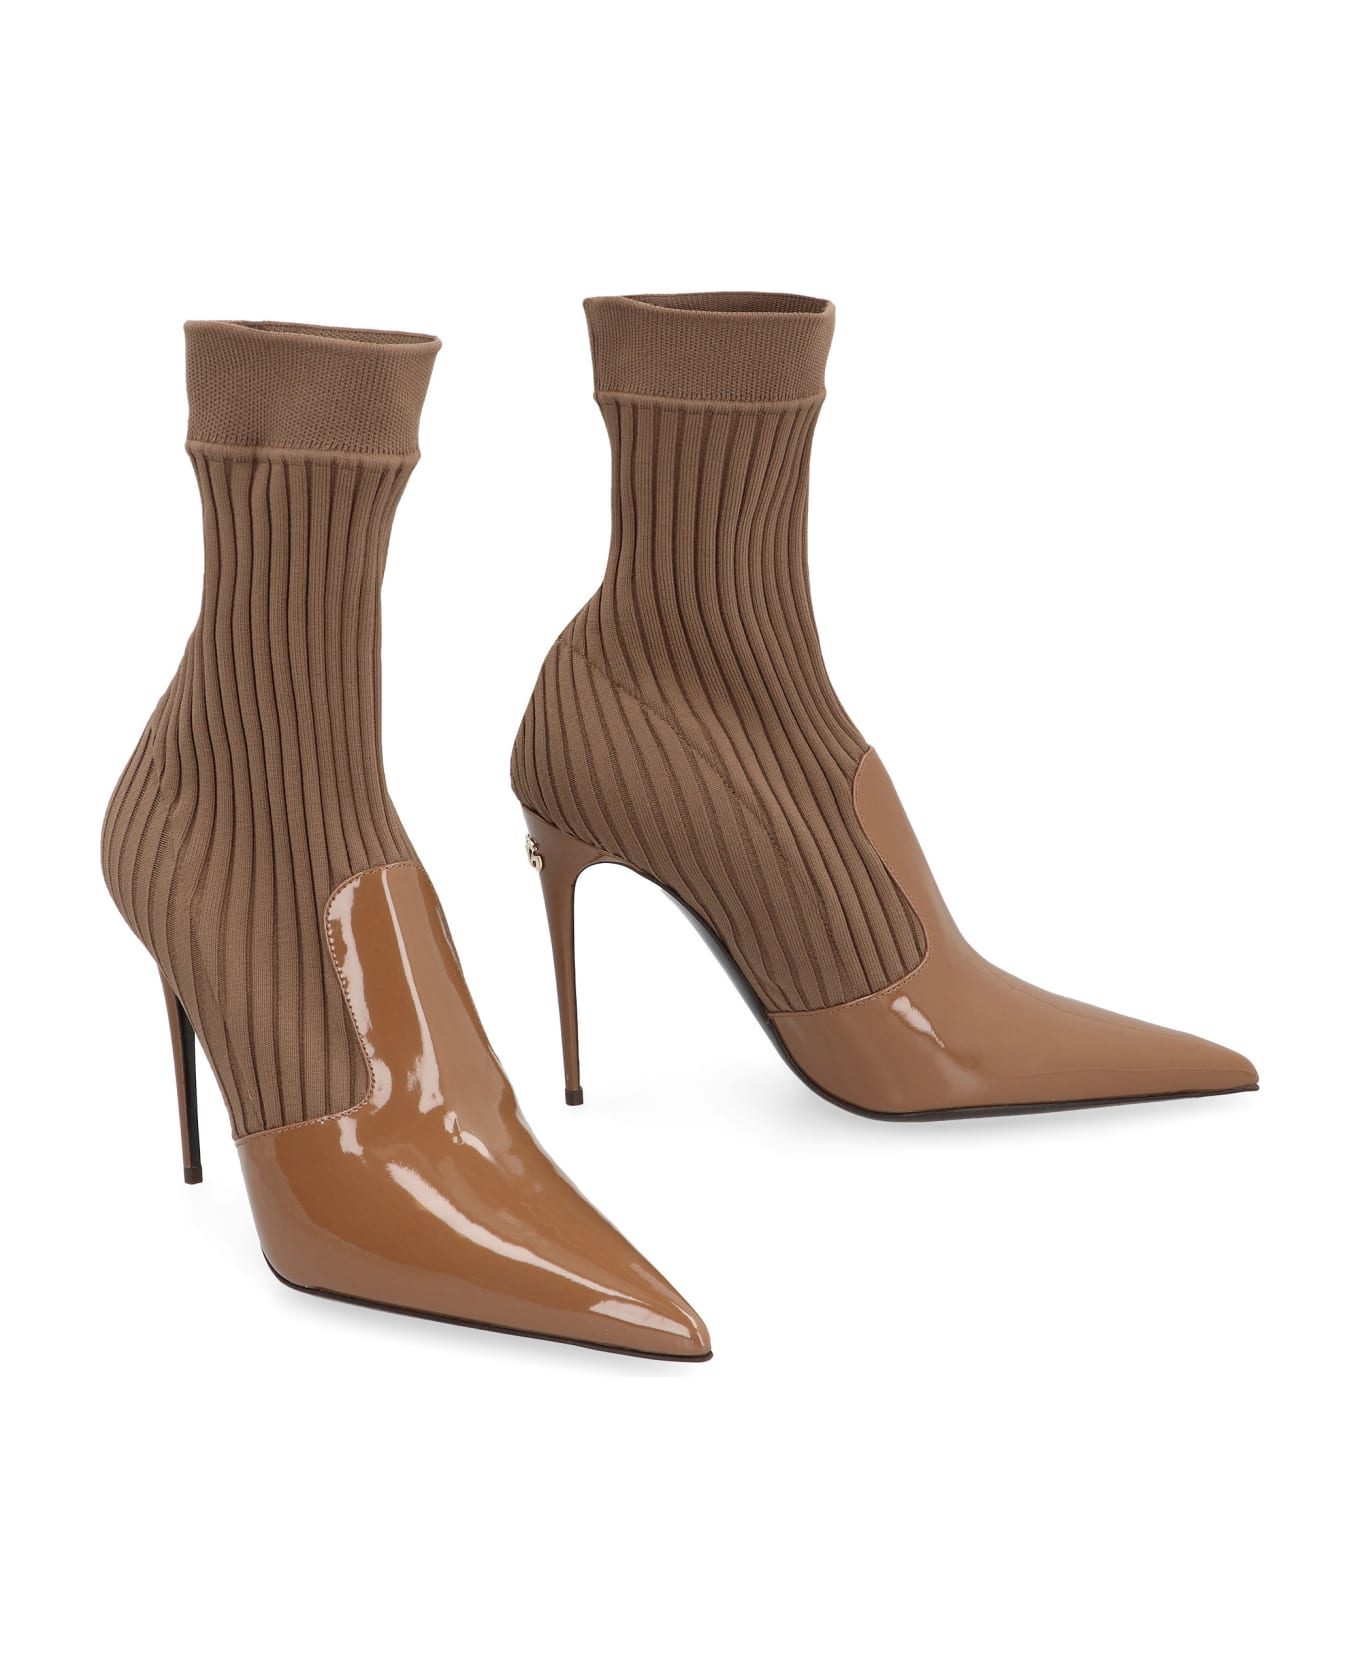 Dolce & Gabbana Sock Ankle Boots - Camel